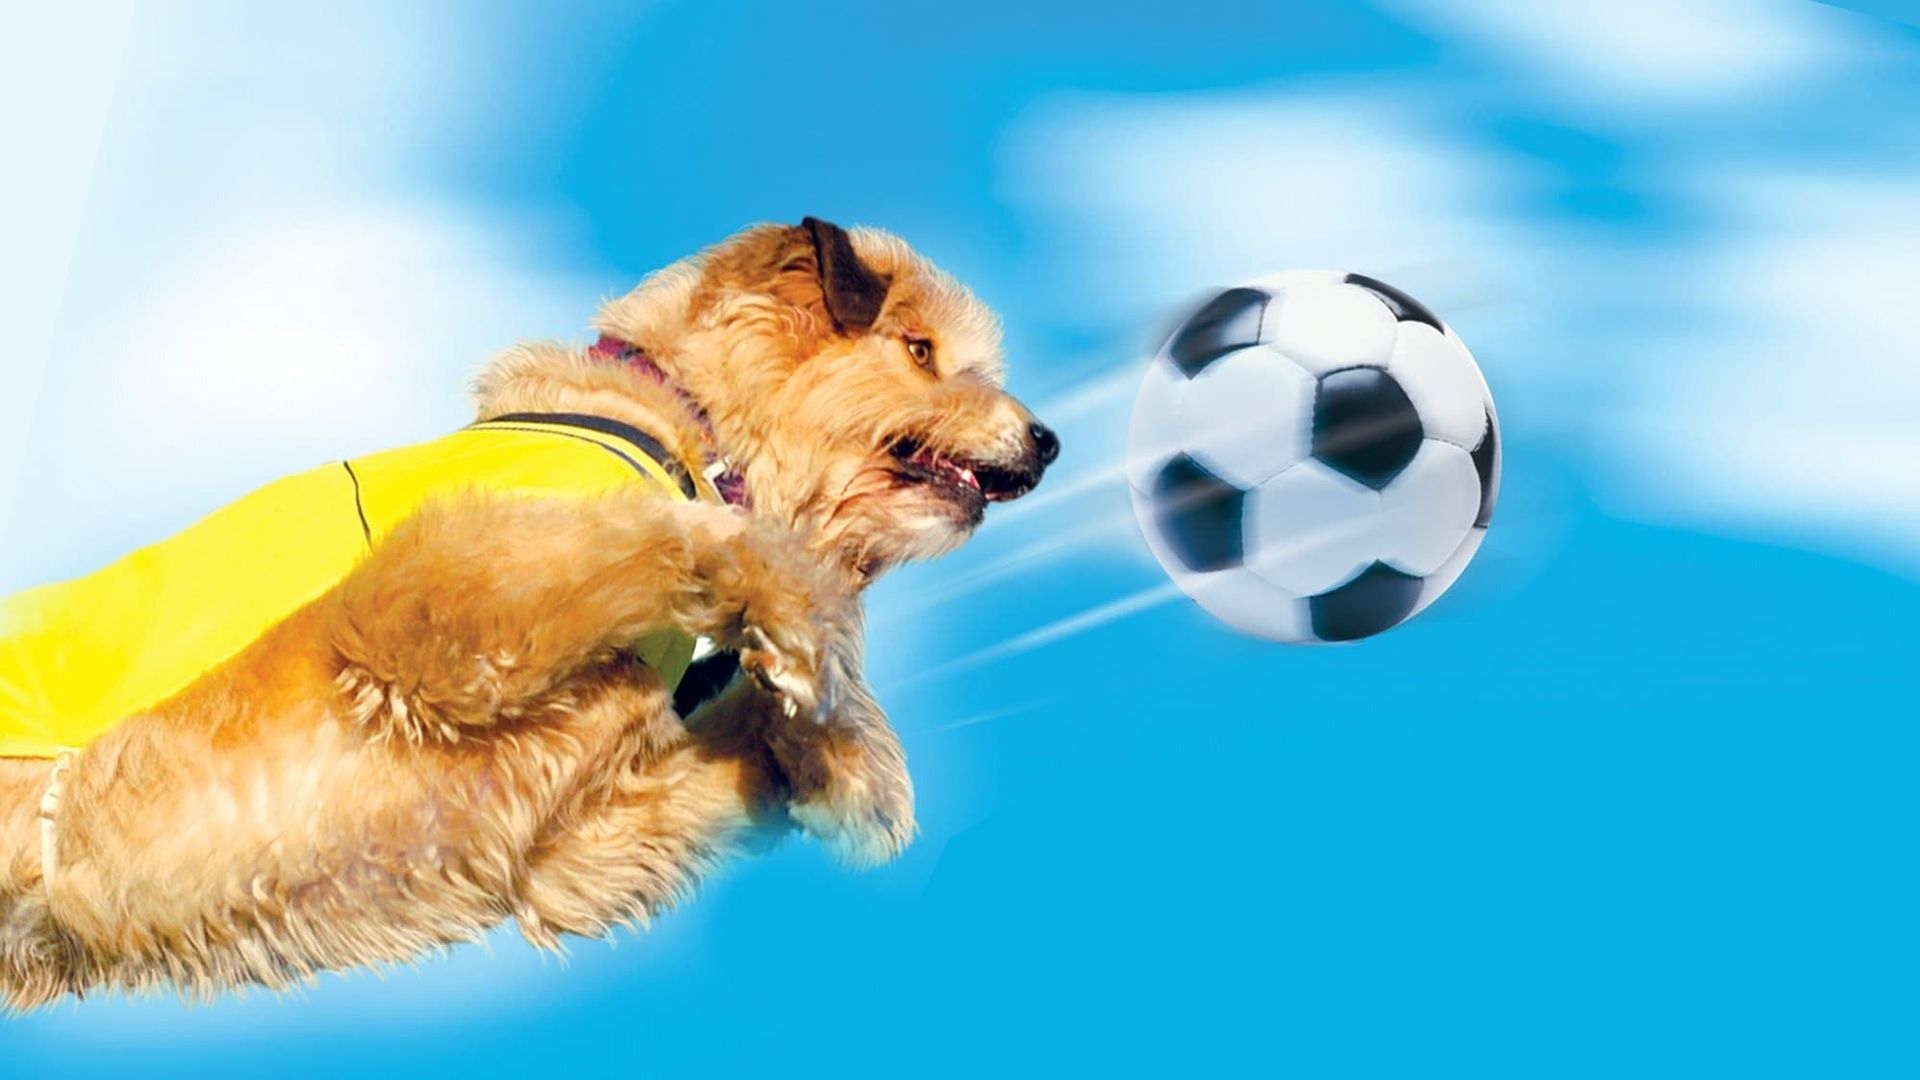 Soccer Dog: European Cup background